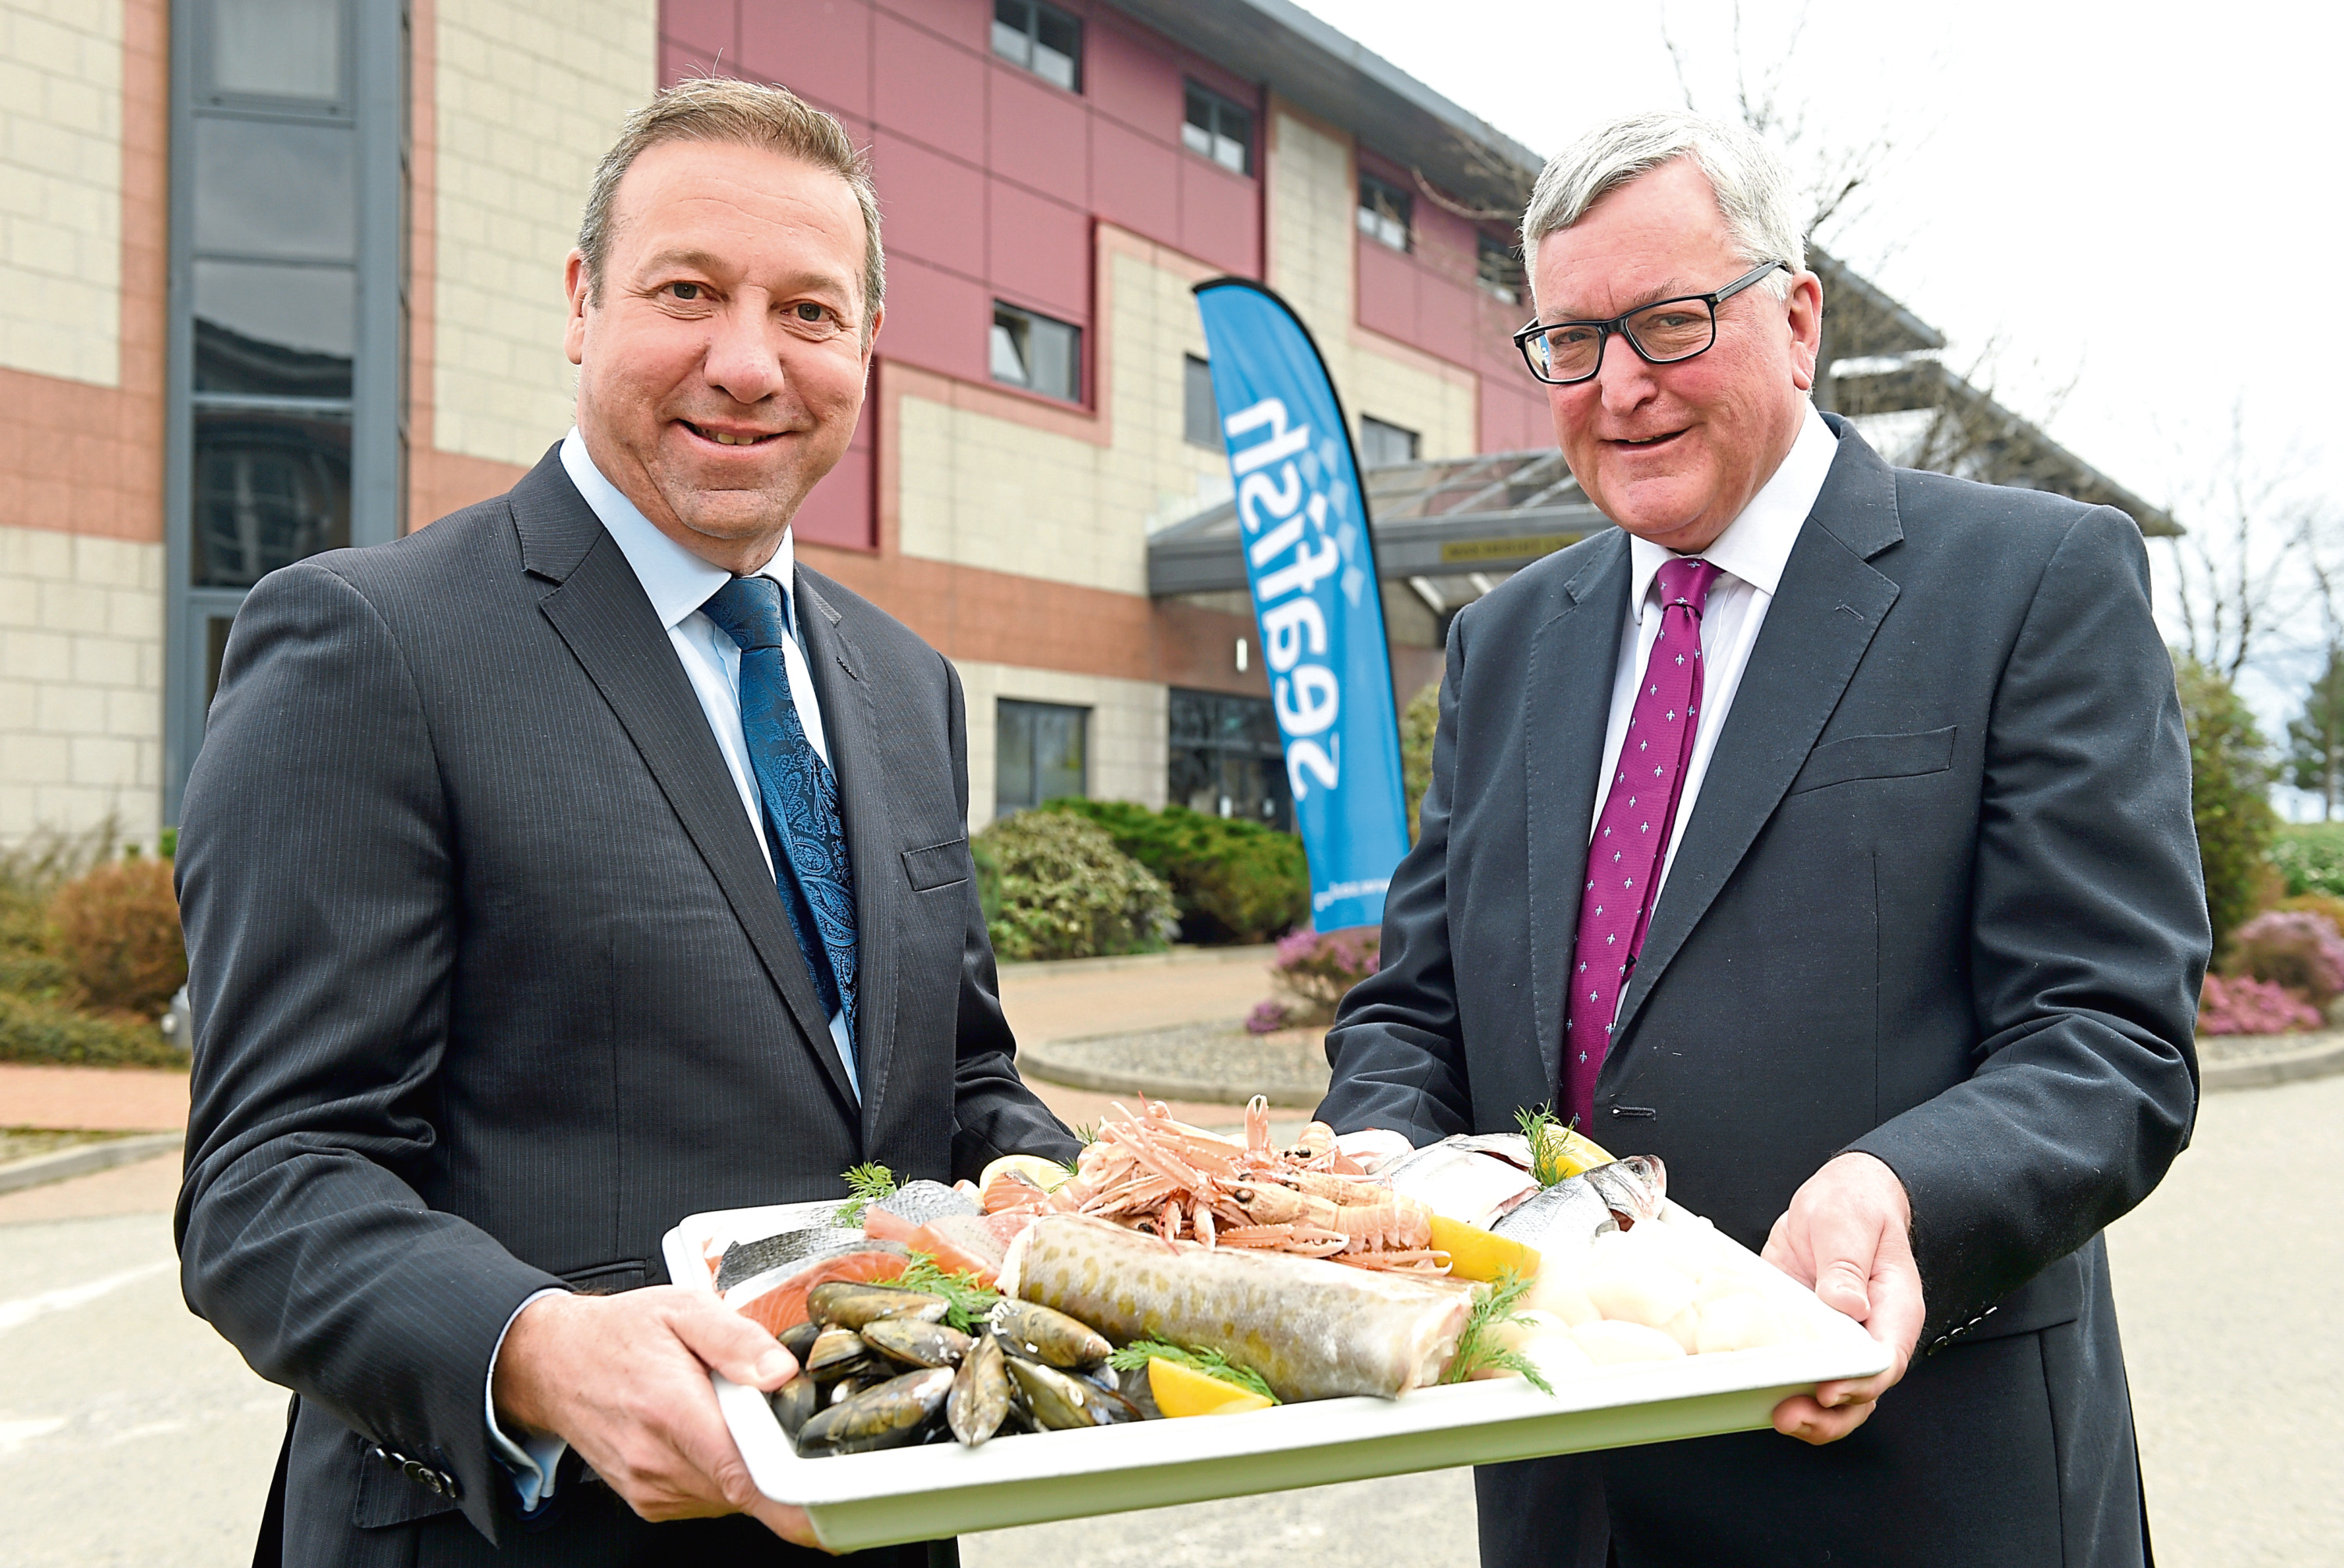 Scottish Seafood Summit 
Pictured are Seafish chief executive Marcus Coleman and Fisheries Secretary Fergus Ewing outside the Double Tree by Hilton, Aberdeen Beach.
Picture by DARRELL BENNS  
Pictured on 27/03/2019  
CR0007499